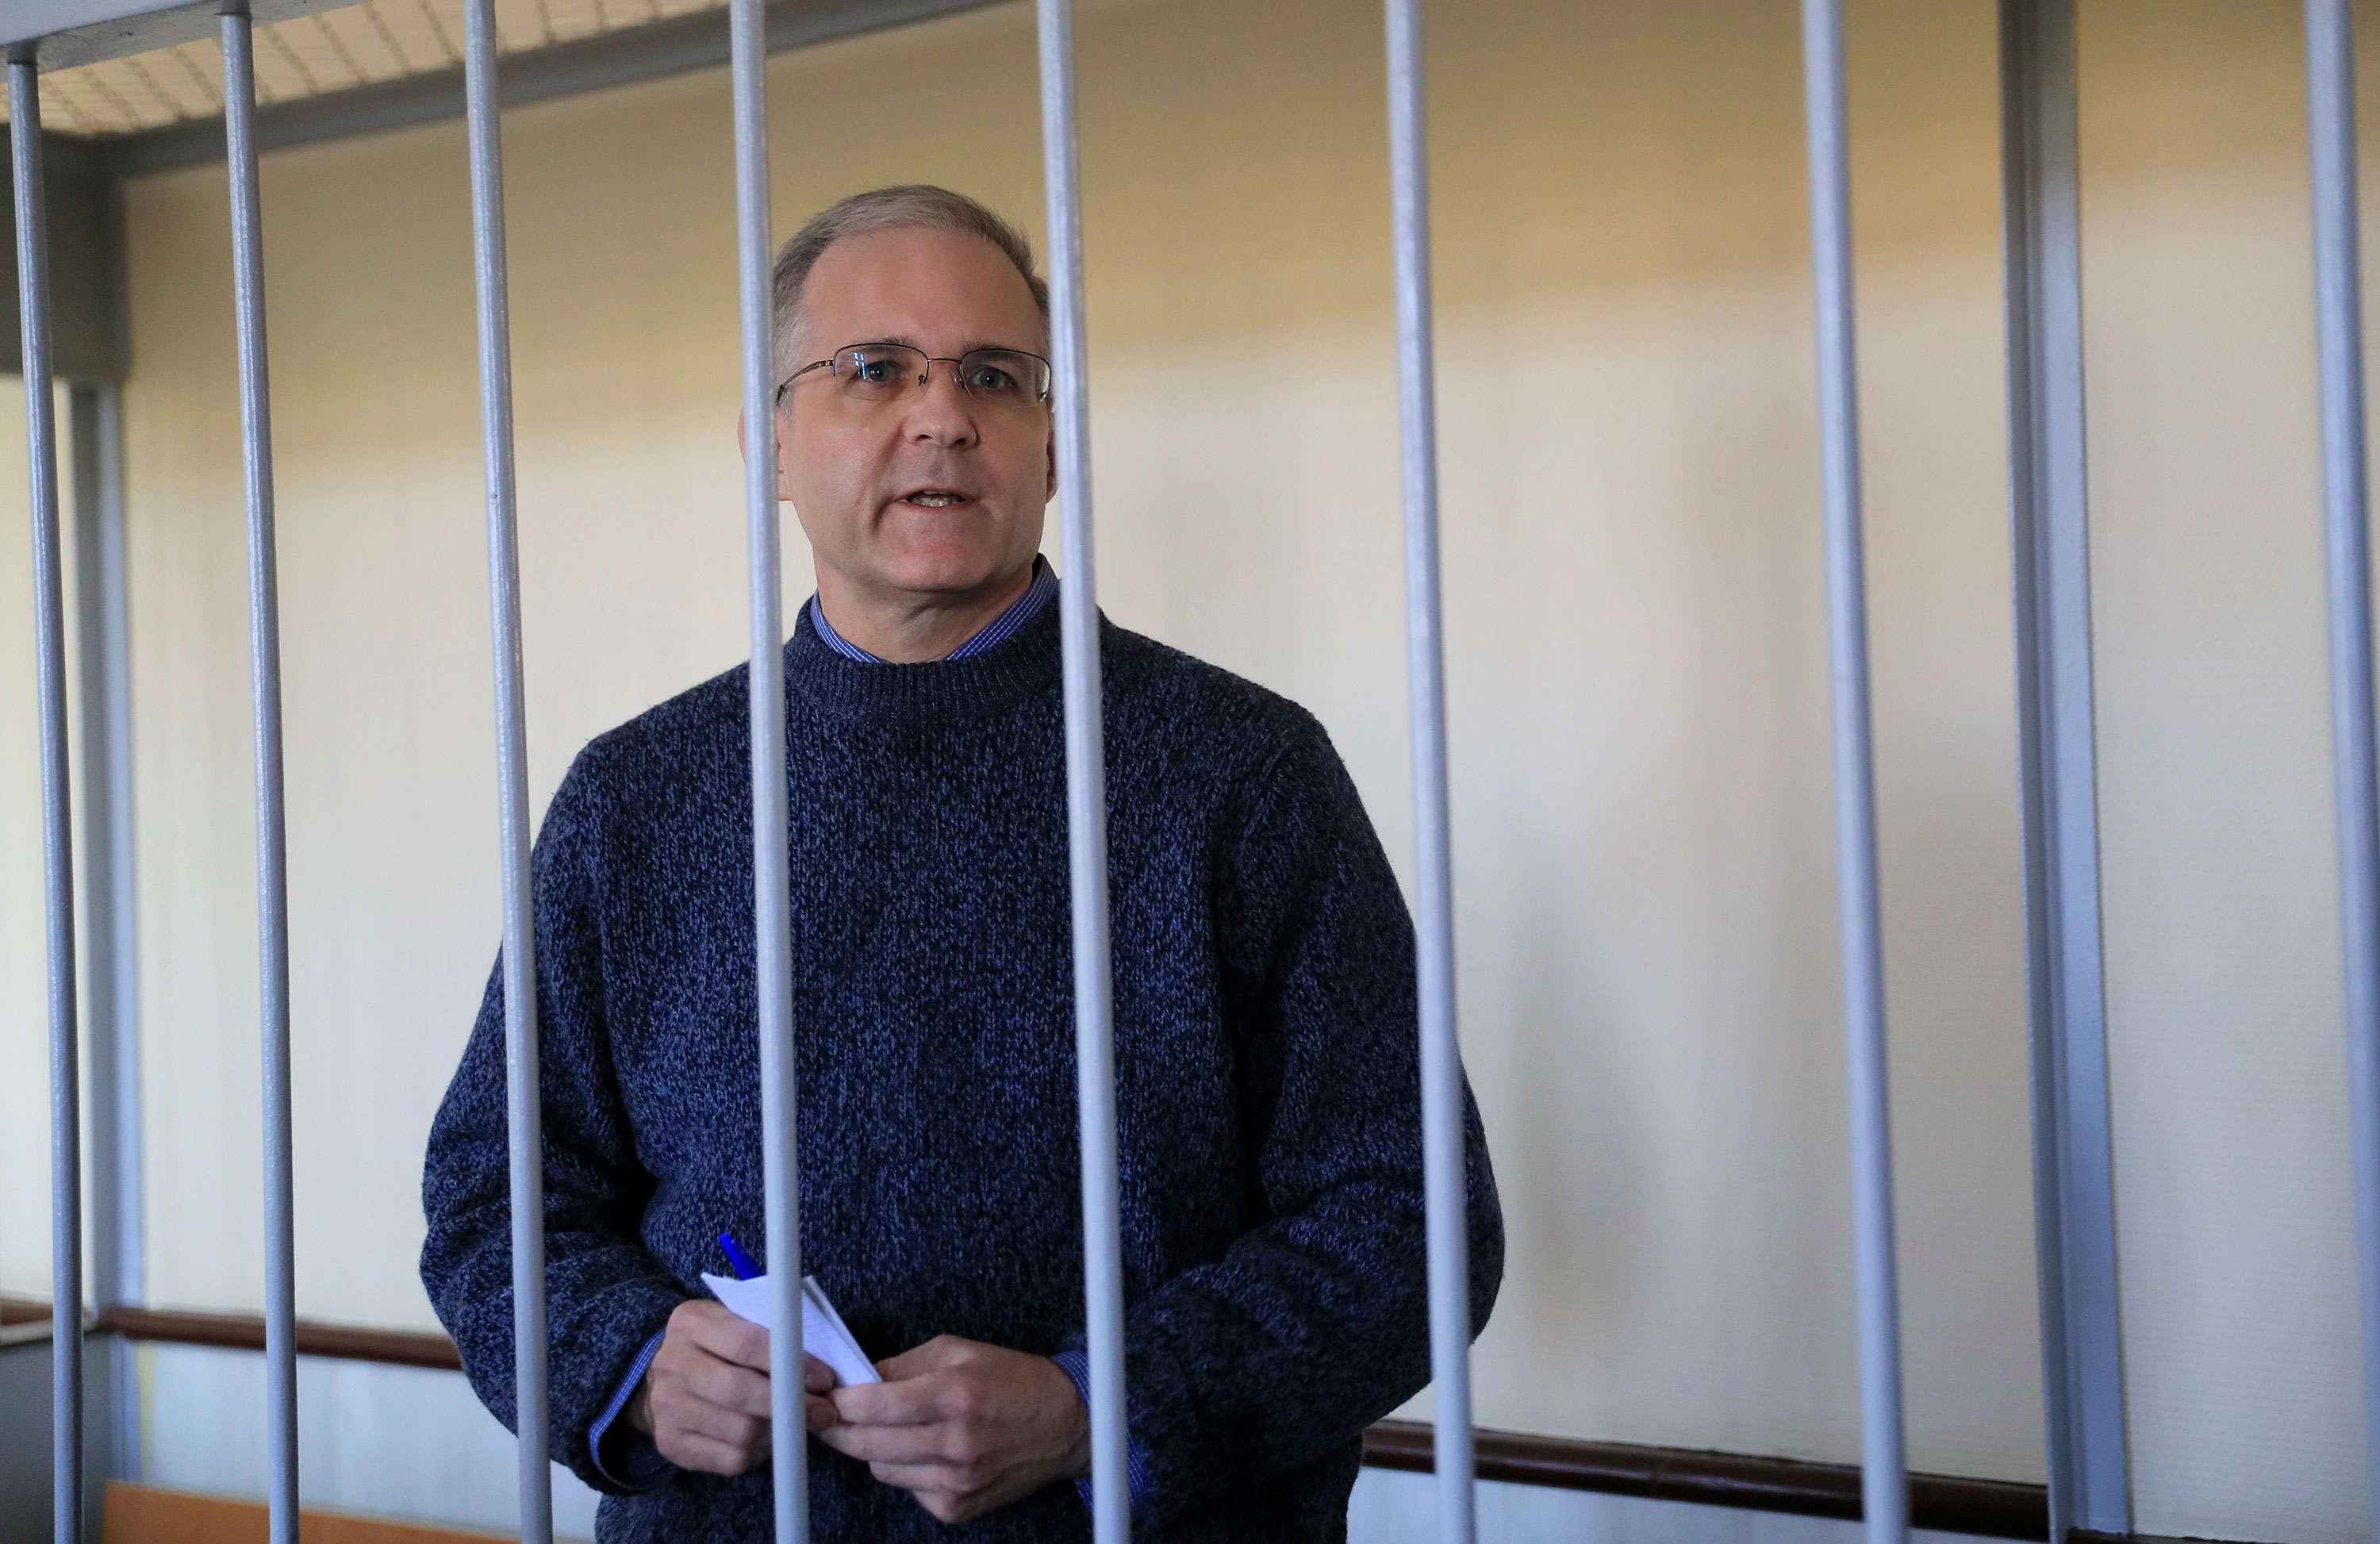 Former US Marine Paul Whelan, who was detained and accused of espionage, stands inside a defendants' cage before a court hearing in Moscow on August 23, 2019. 